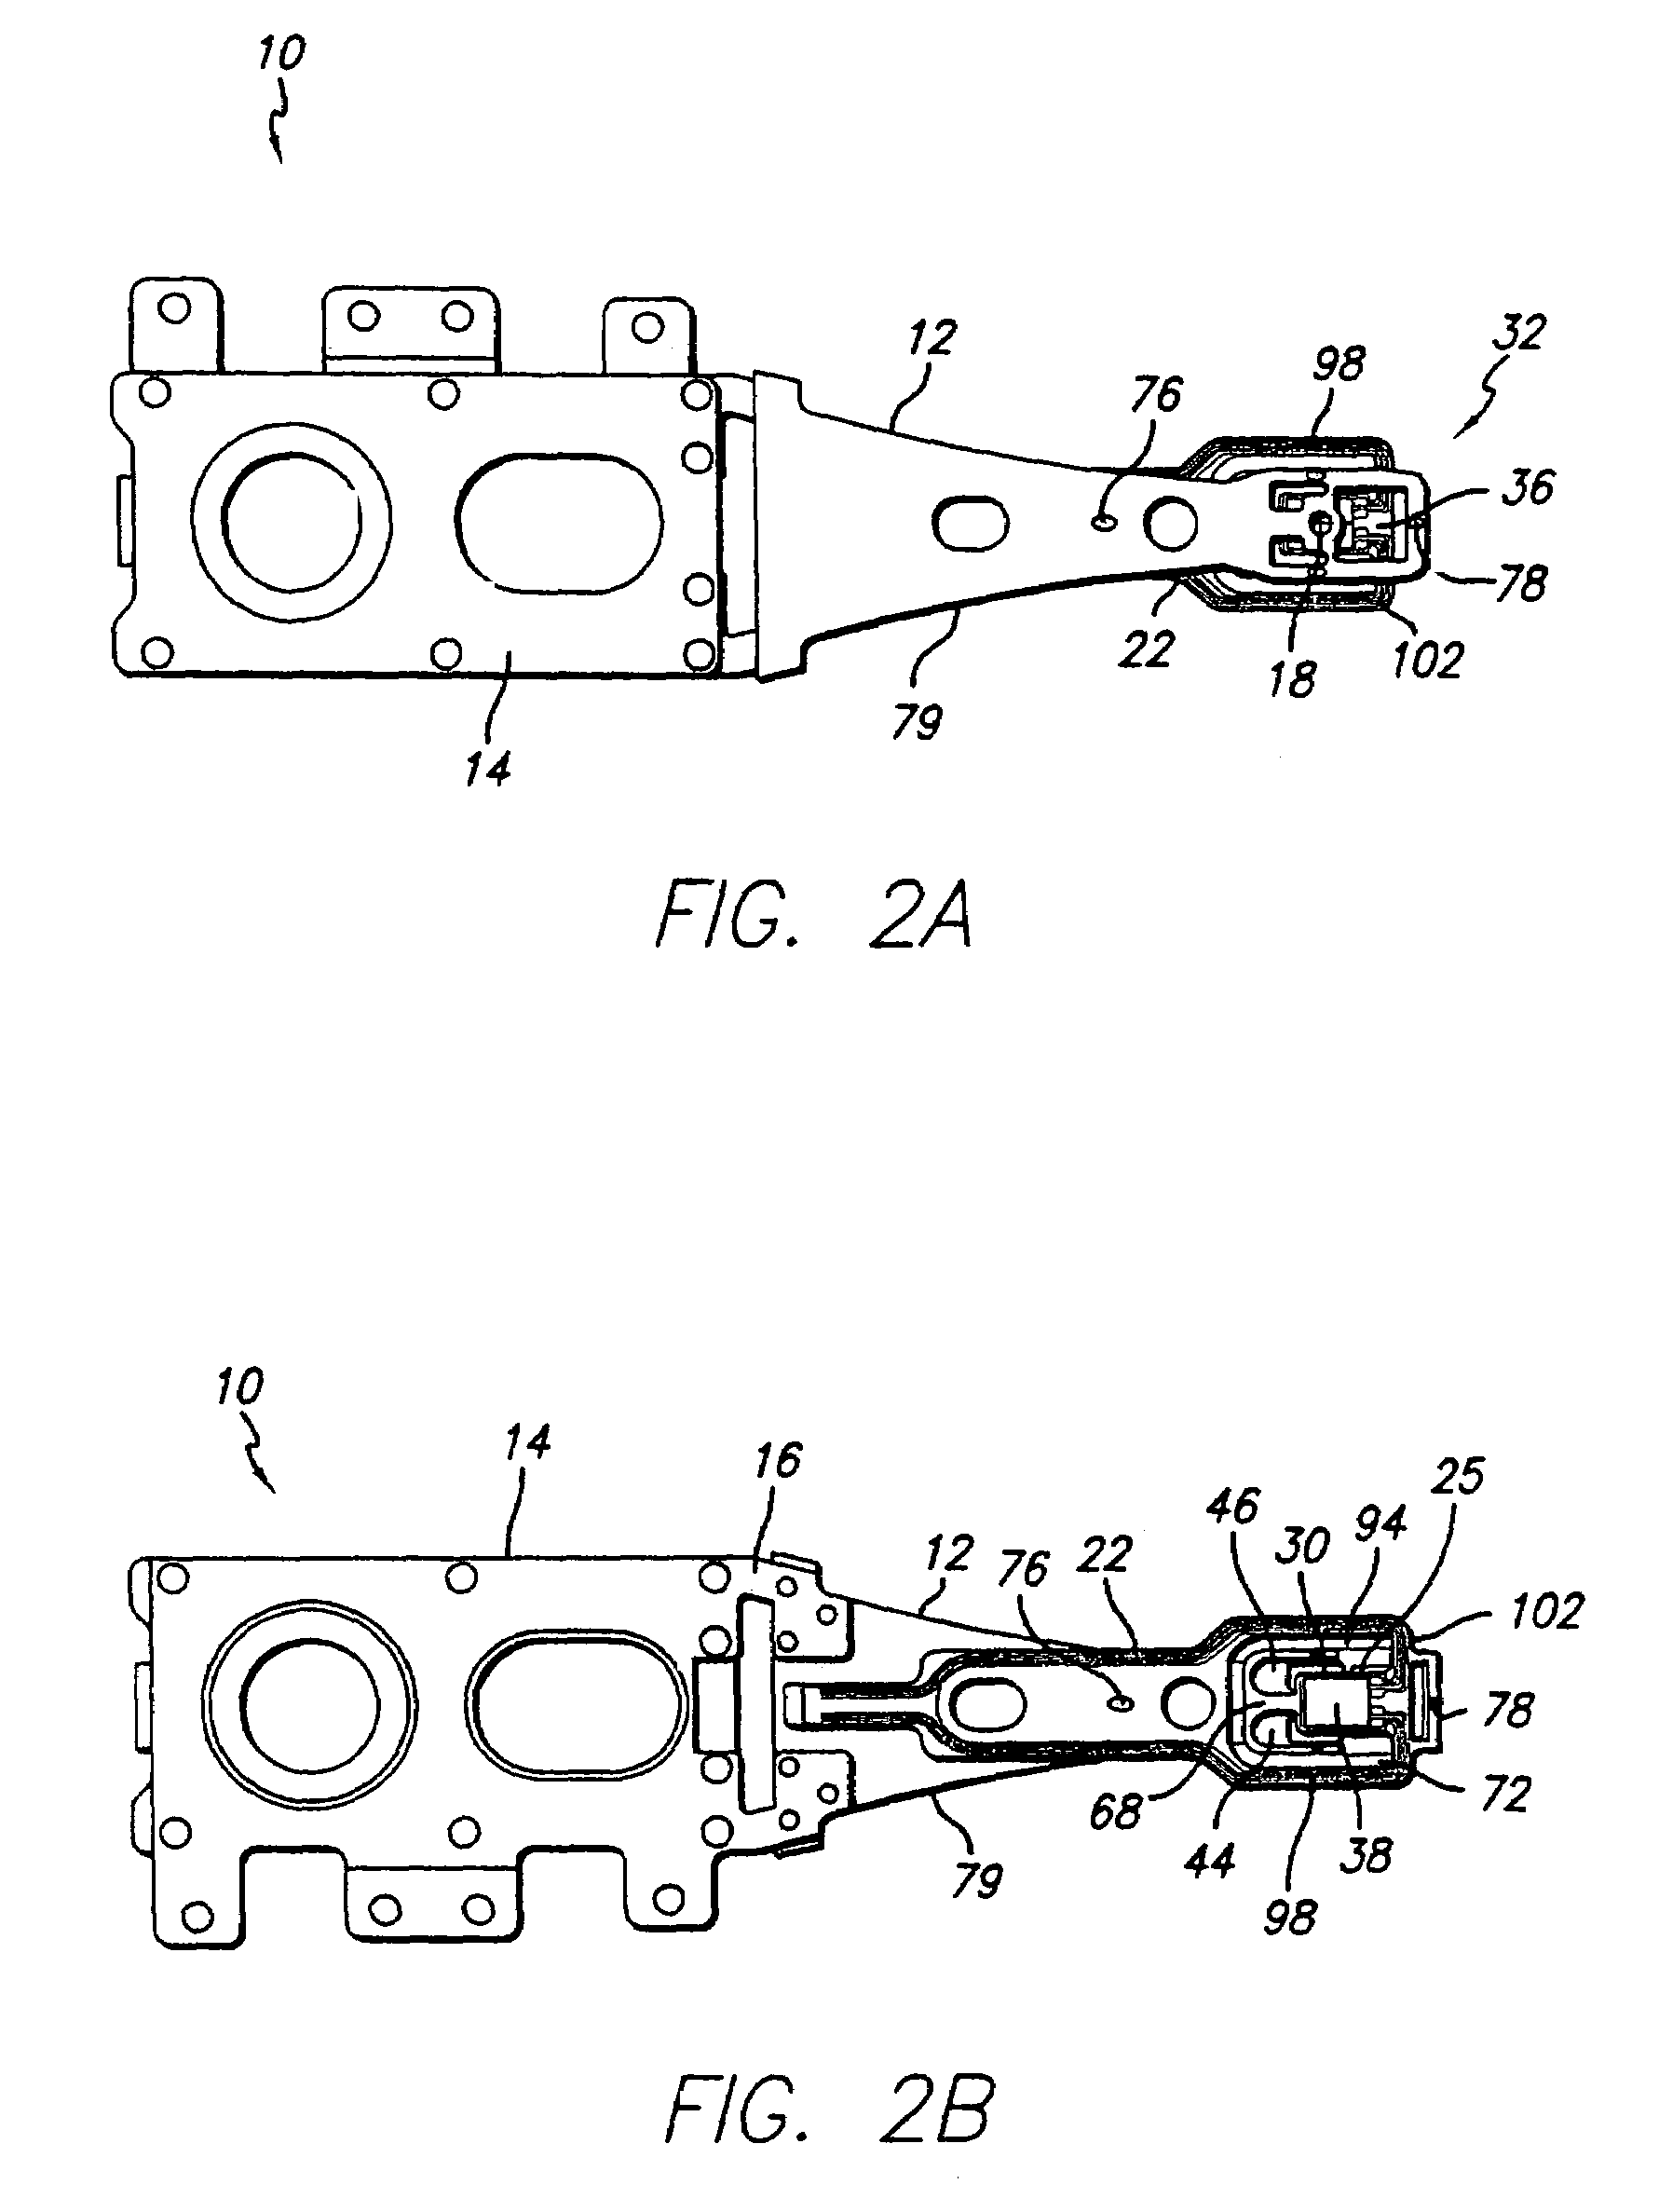 Disk drive suspension with limiter feature